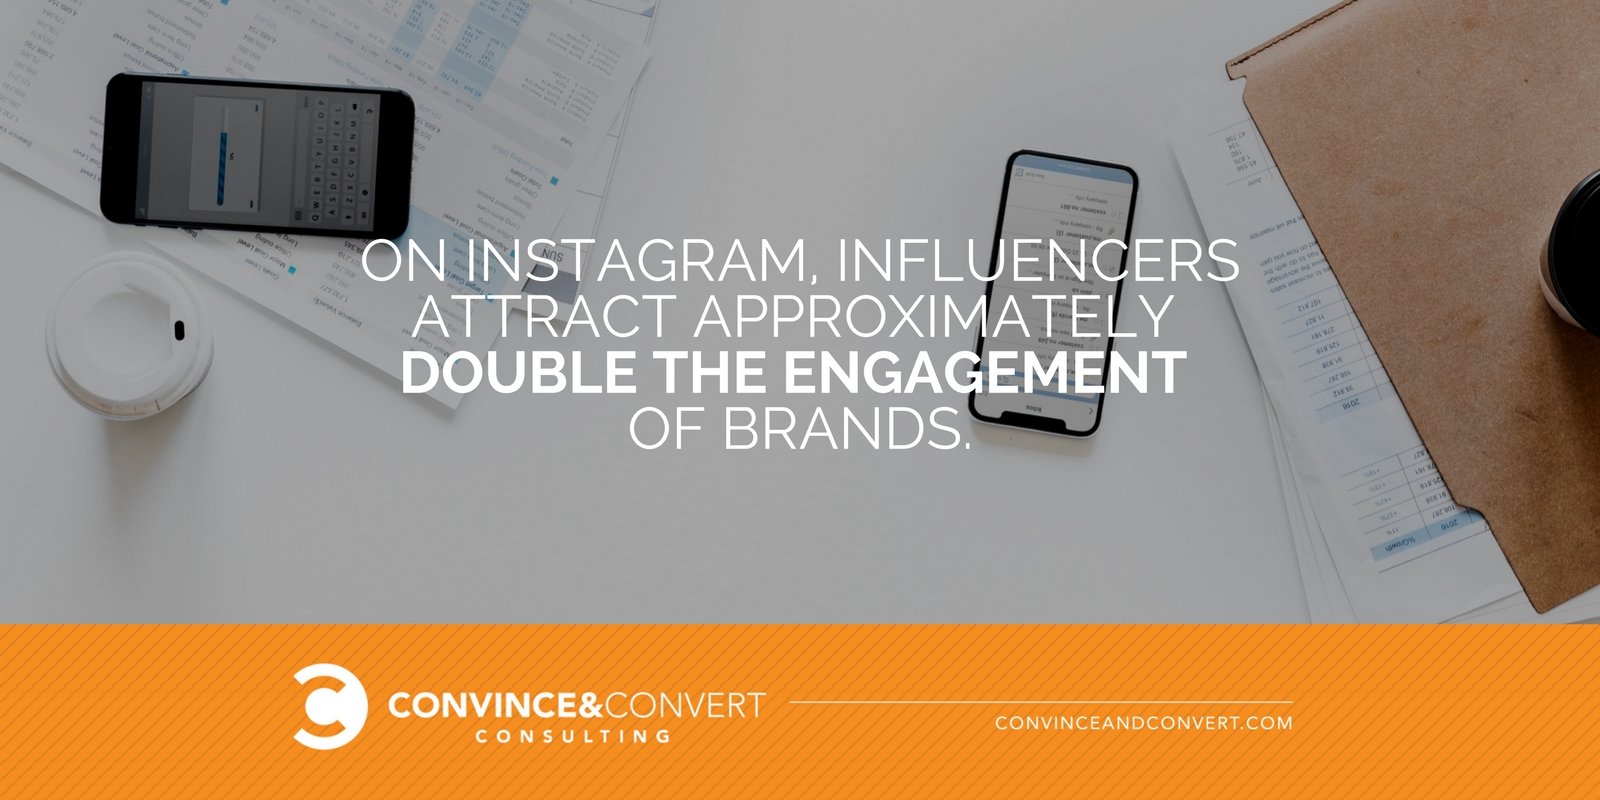 Influencers attract double the engagement